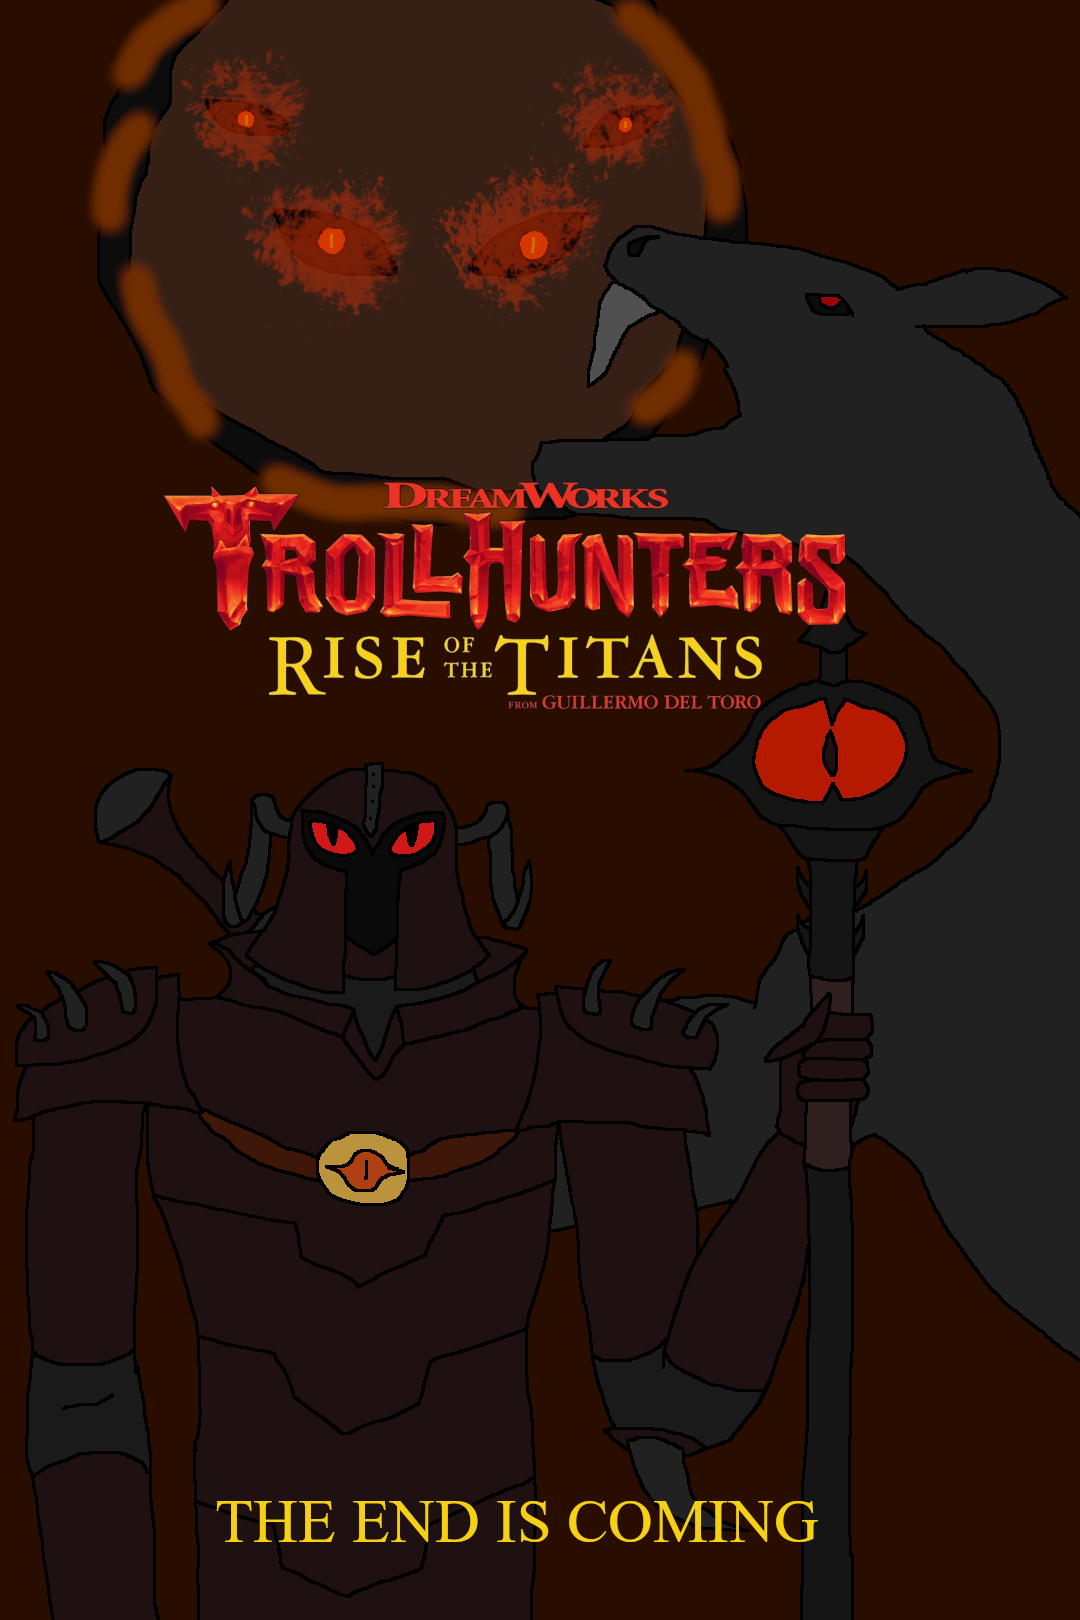 Trollhunters rise of the titans png by Chris2156 on DeviantArt